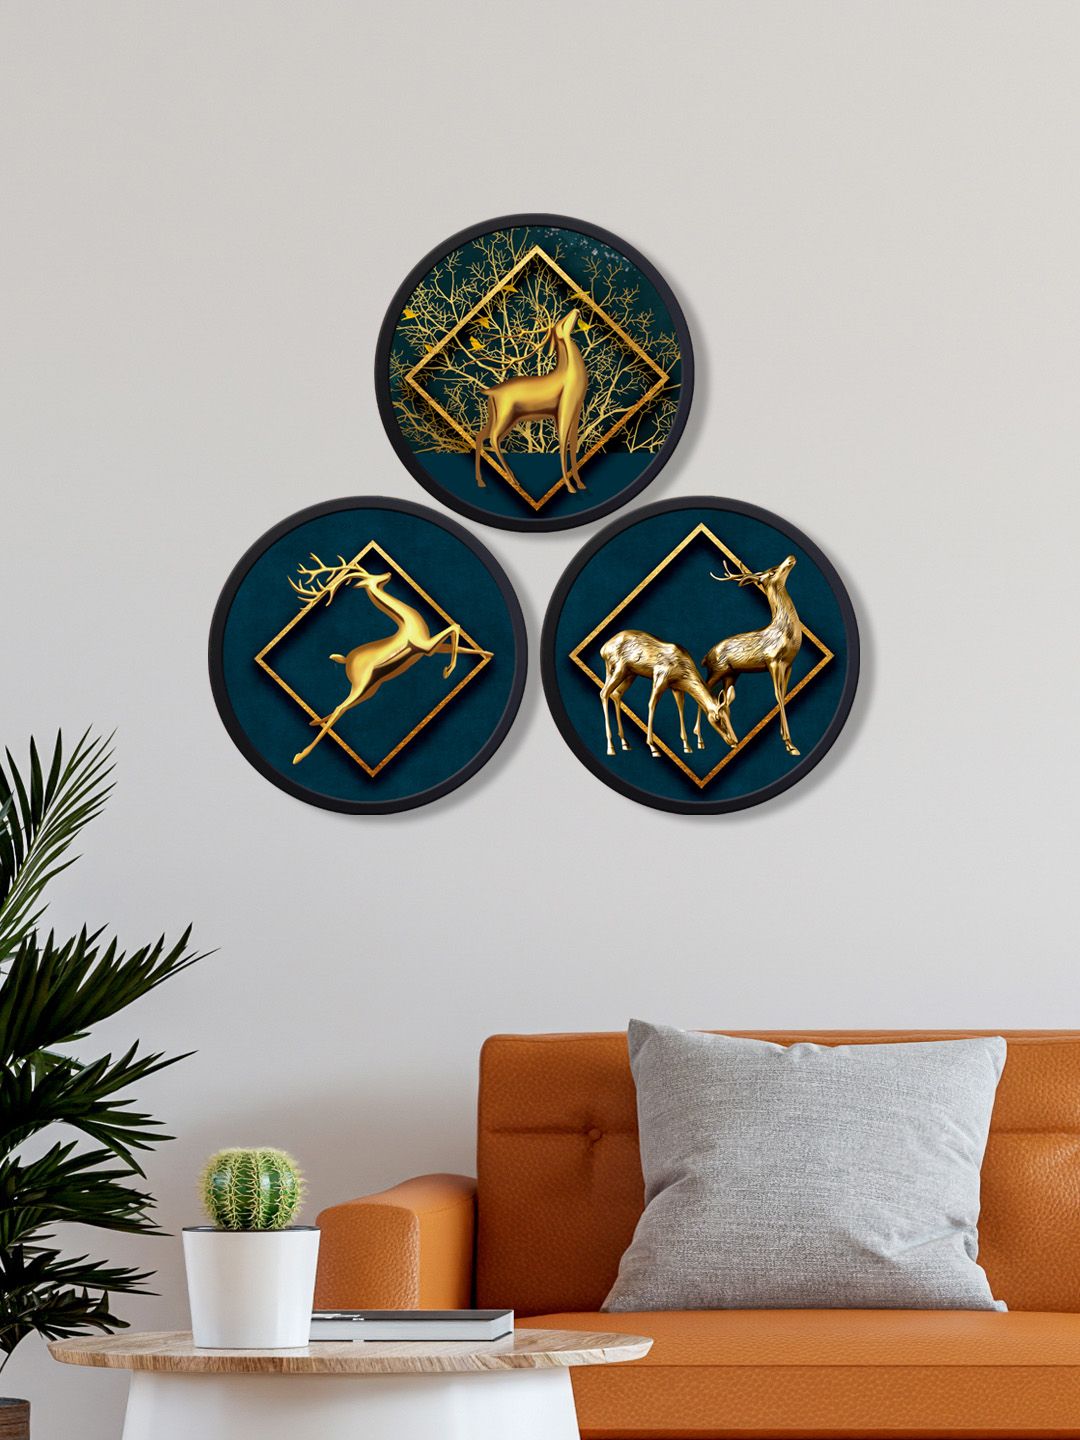 999Store Set Of 3 Gold-Toned & Teal Round Canvas Painting Frames Wall Art Price in India